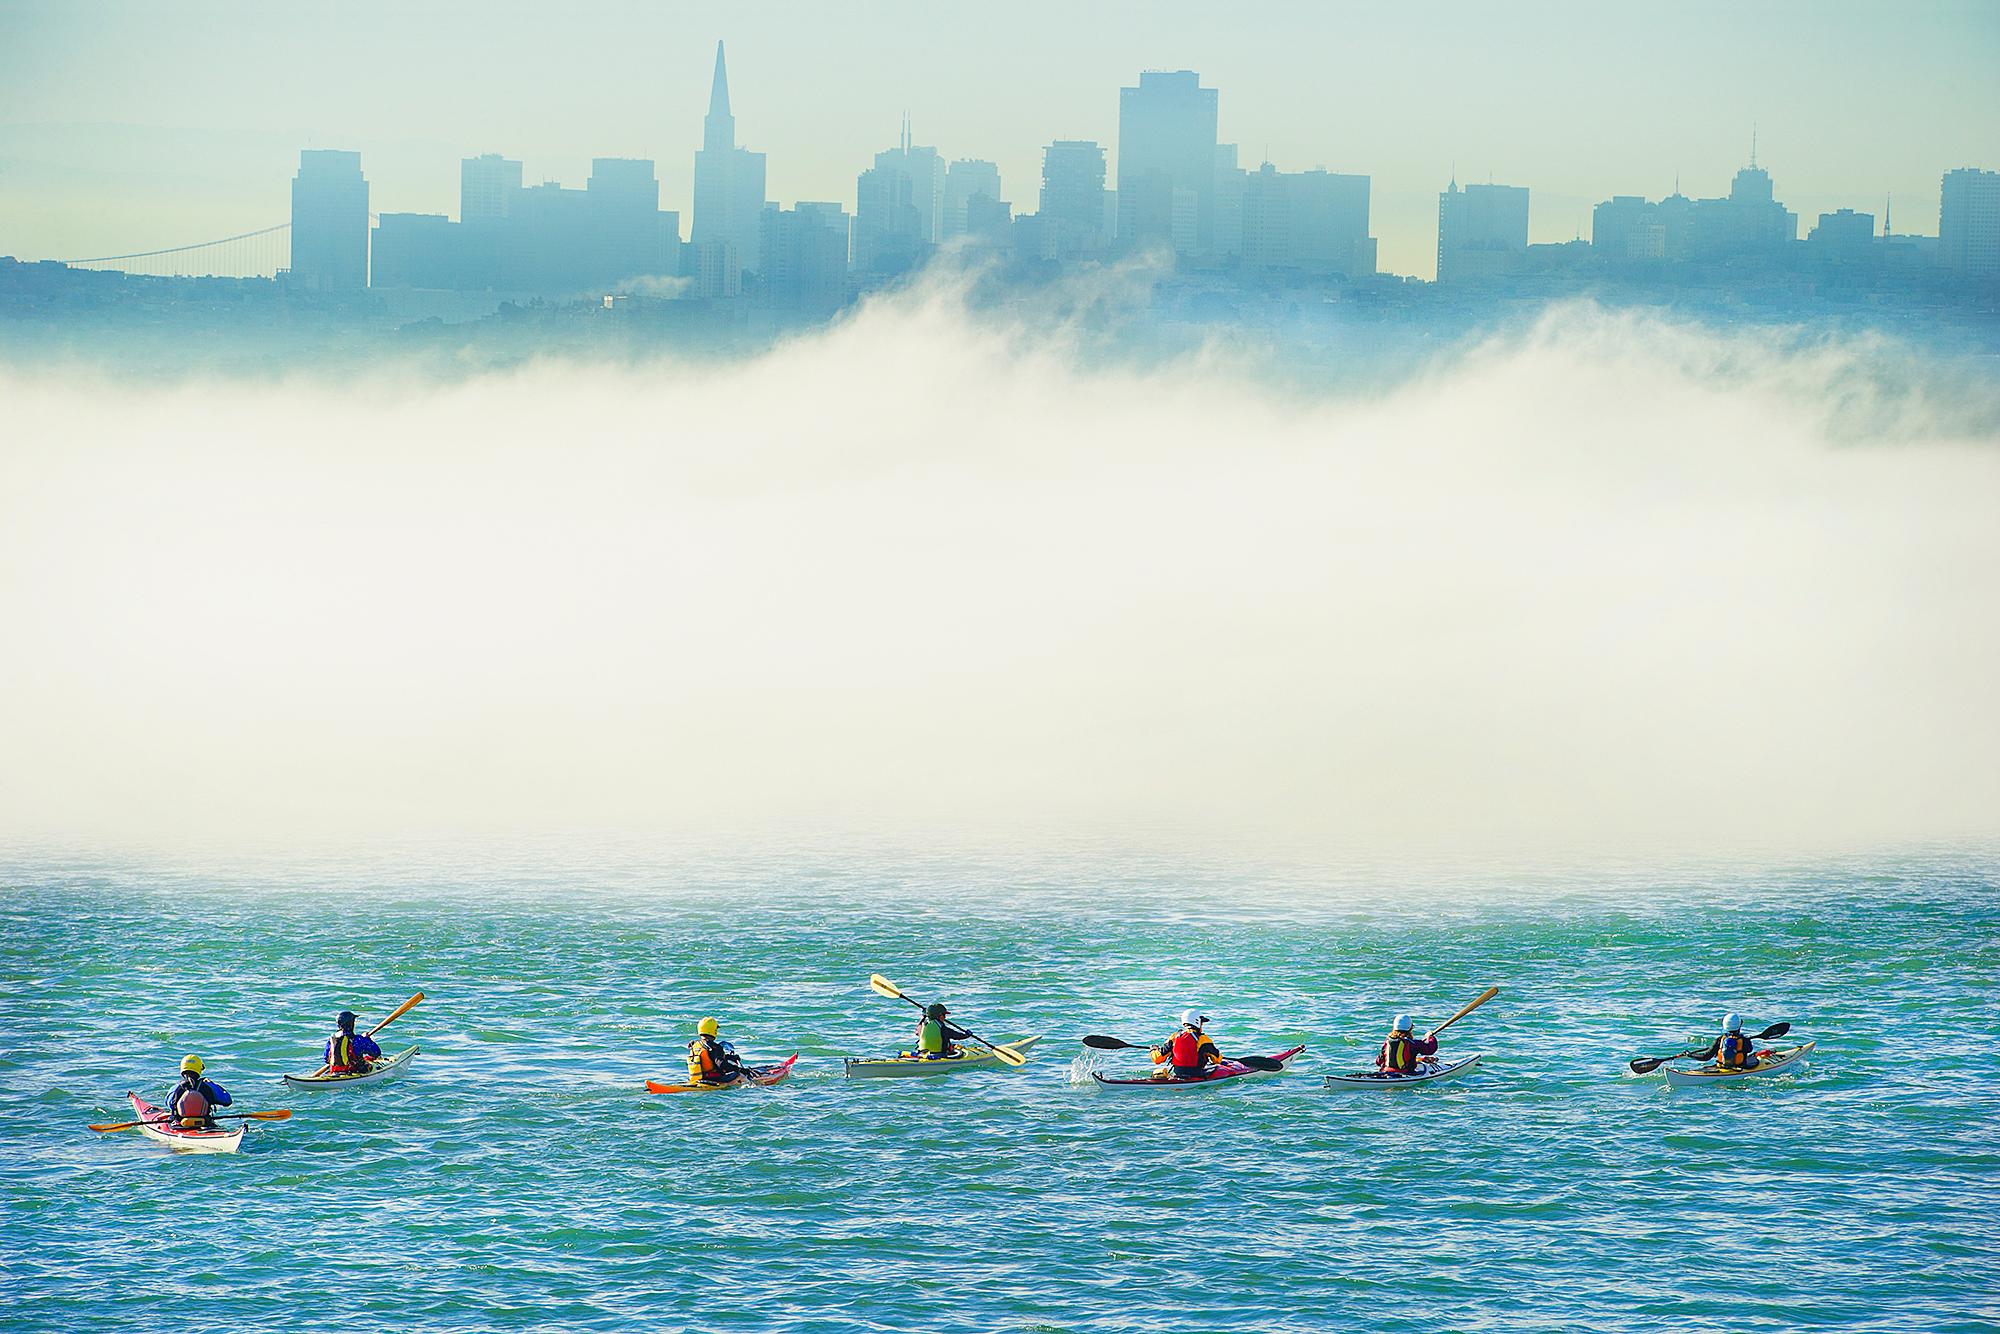 Mitchell Funk Landscape Photograph - Surreal Kayak Party in Foggy Metaphysical San Francisco Bay with Muted Skyline